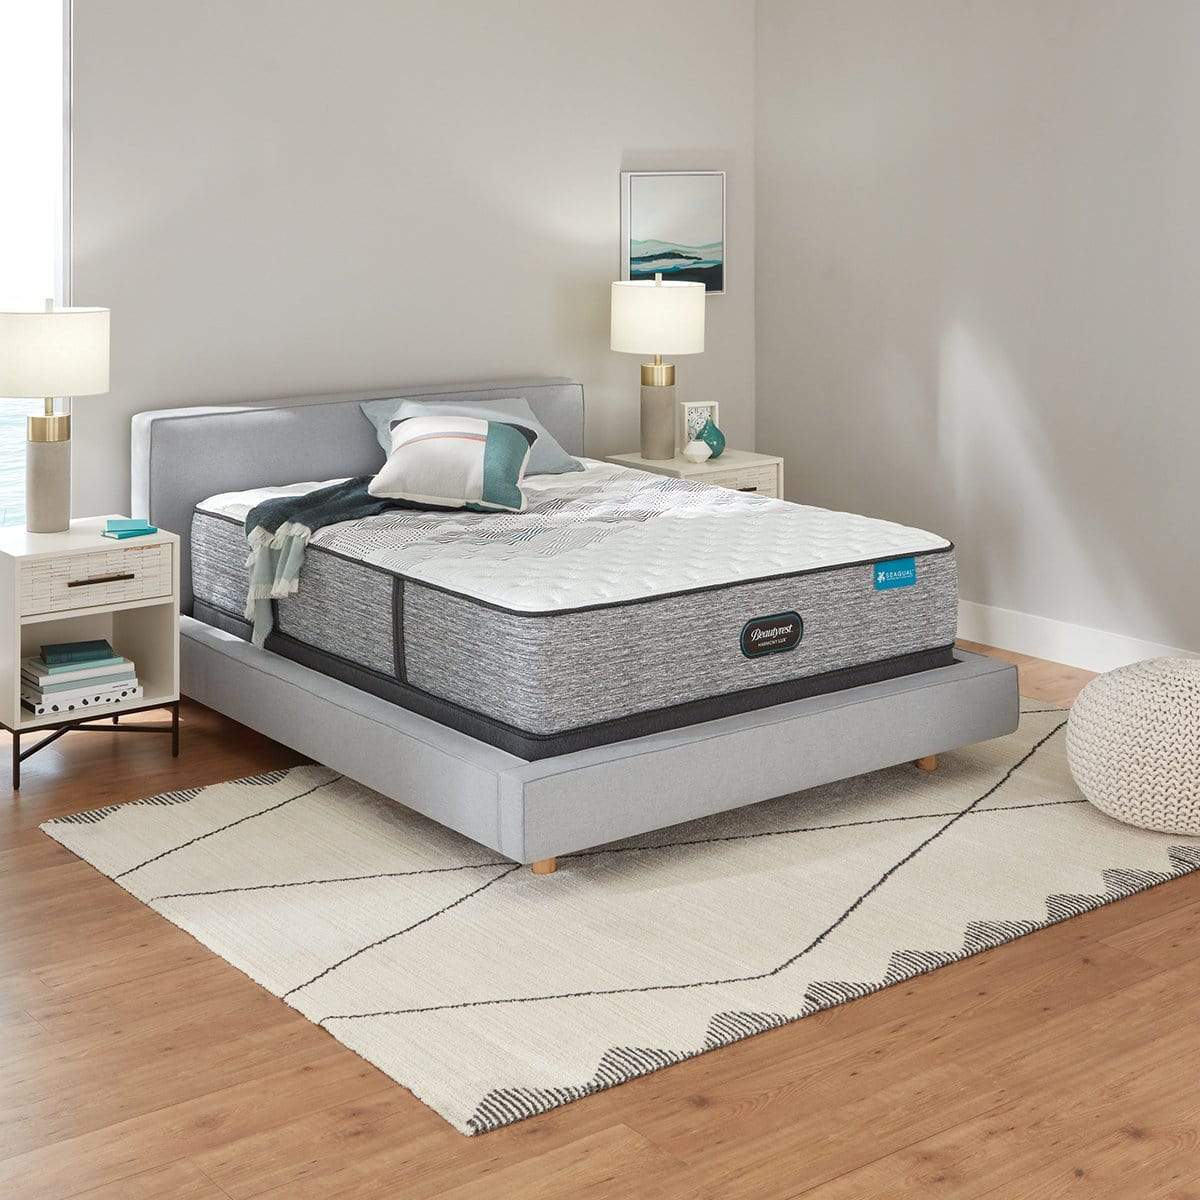 Beautyrest Harmony Lux Extra Firm Mattress In Bedroom